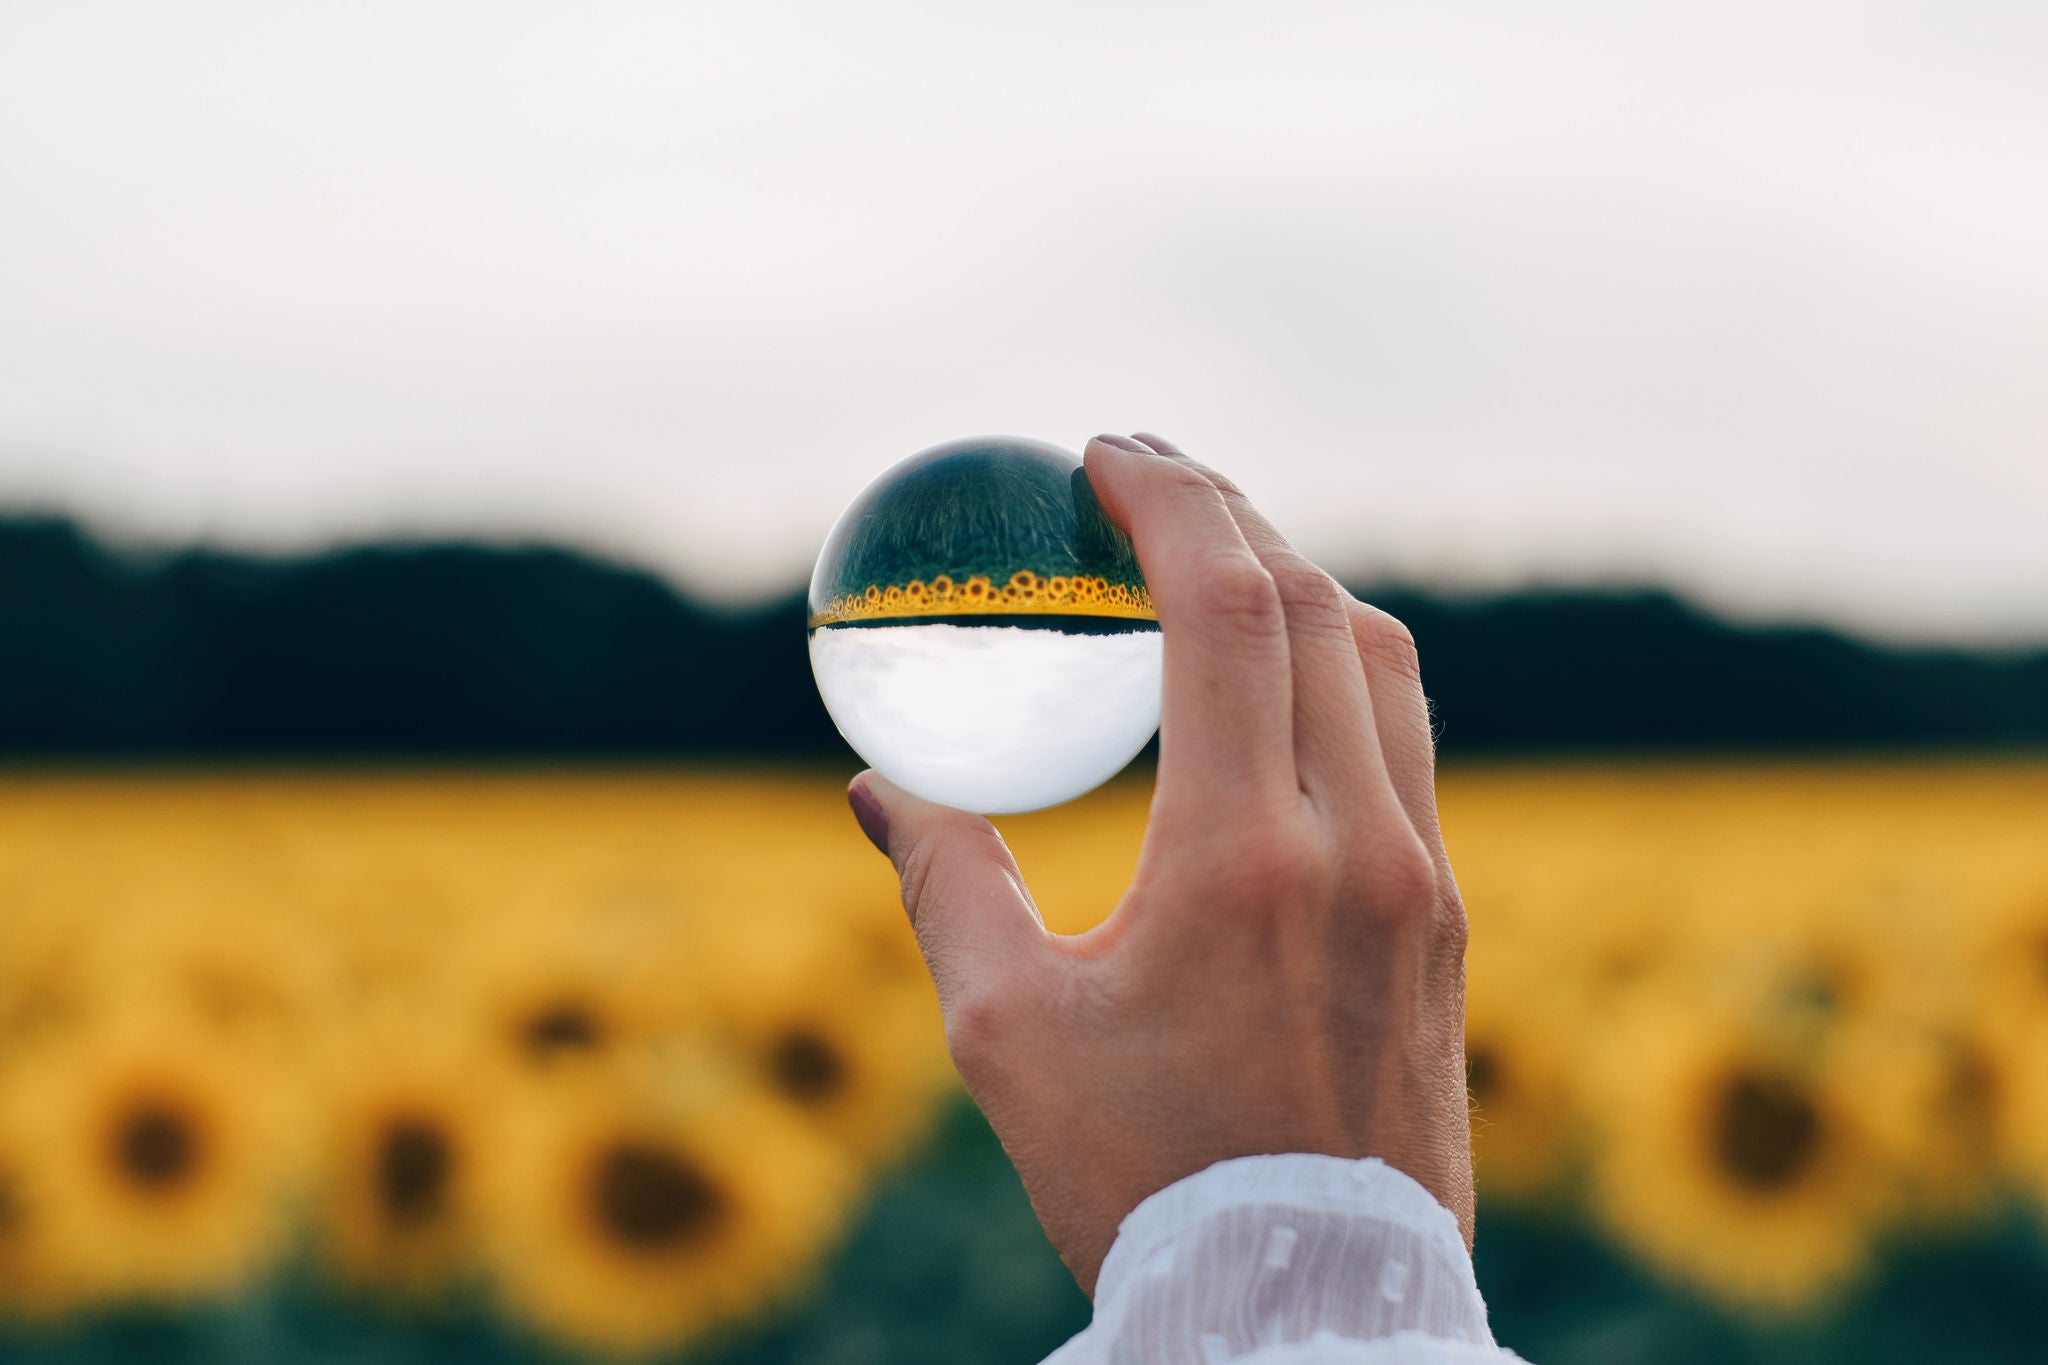 Reflections of sunflowers in crystal ball